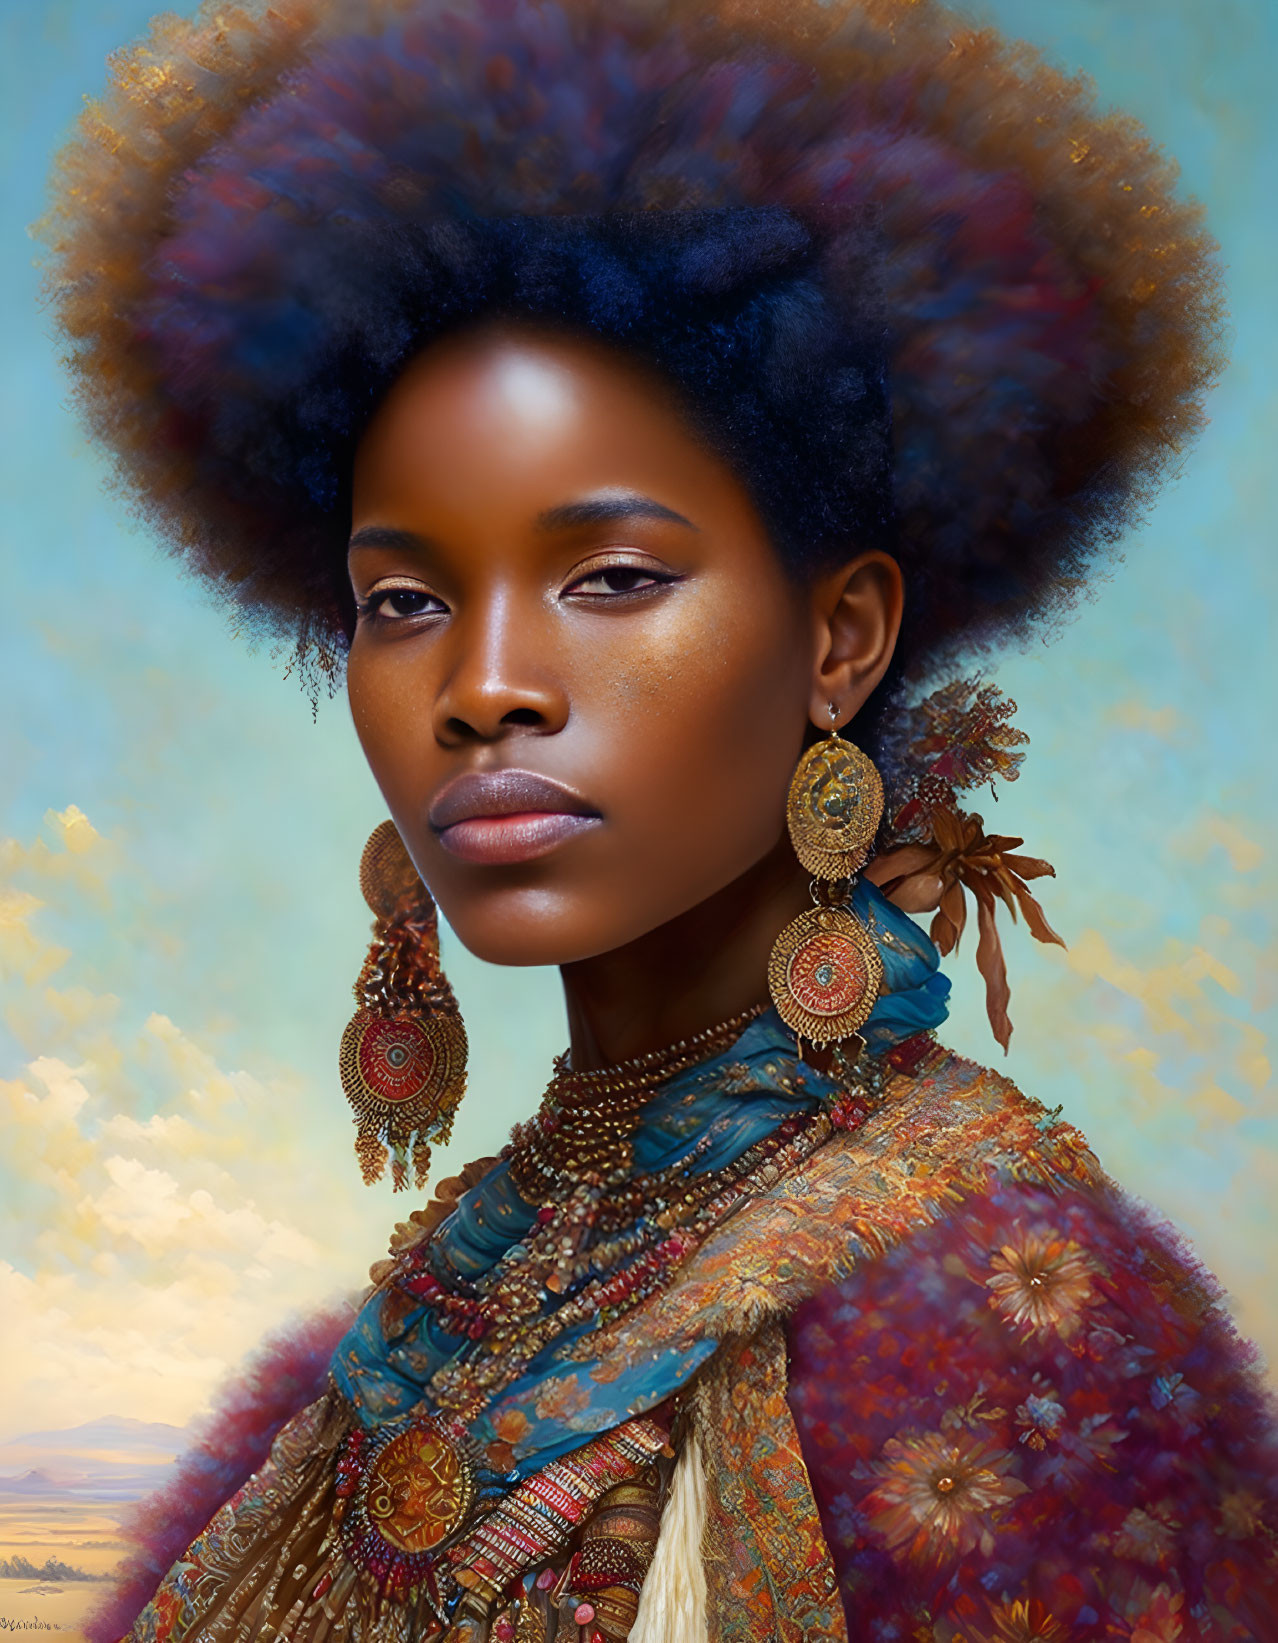 Woman with Afro and Circular Earrings in Colorful Outfit on Sky Blue Background